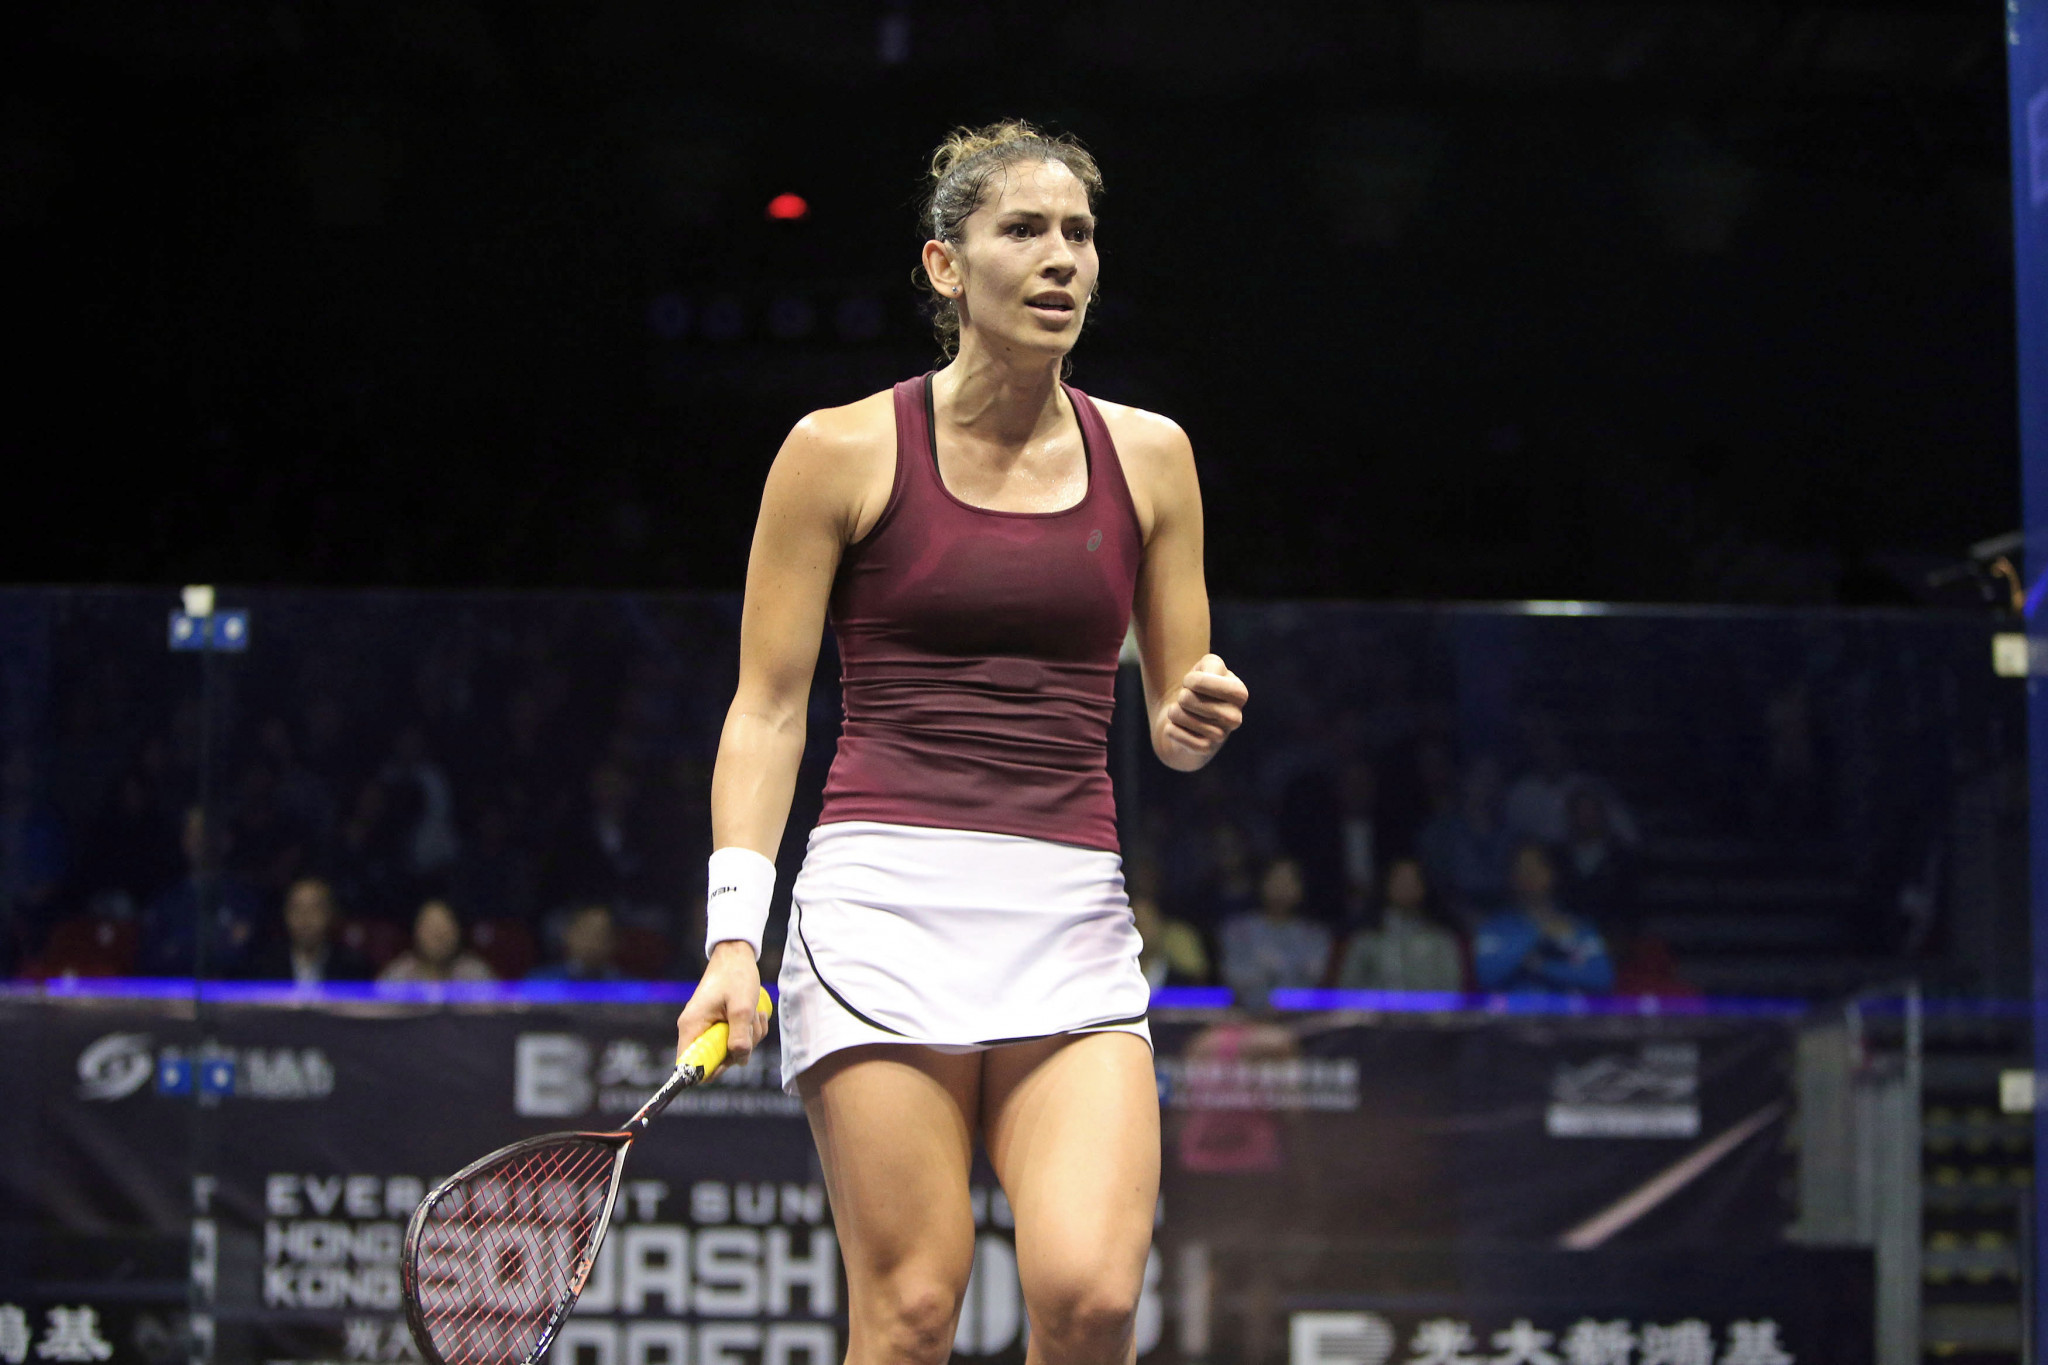 New Zealand's Joelle King joins an otherwise all-Egyptian final line-up at the PSA Hong Kong Open ©PSA